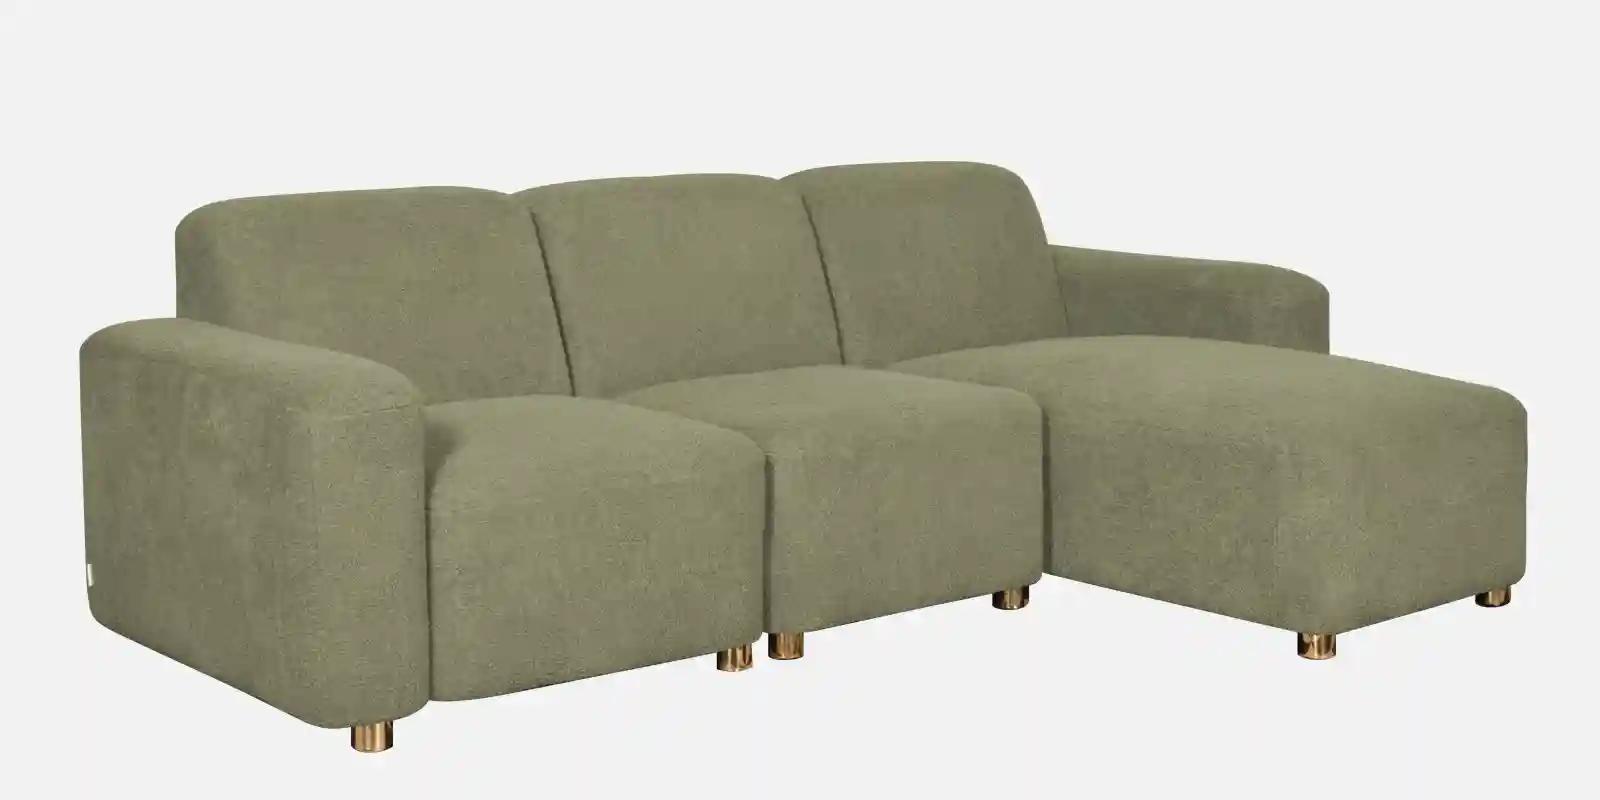 Pine Wood Polyester Fabric Sofa Grey -2 Seater LHS